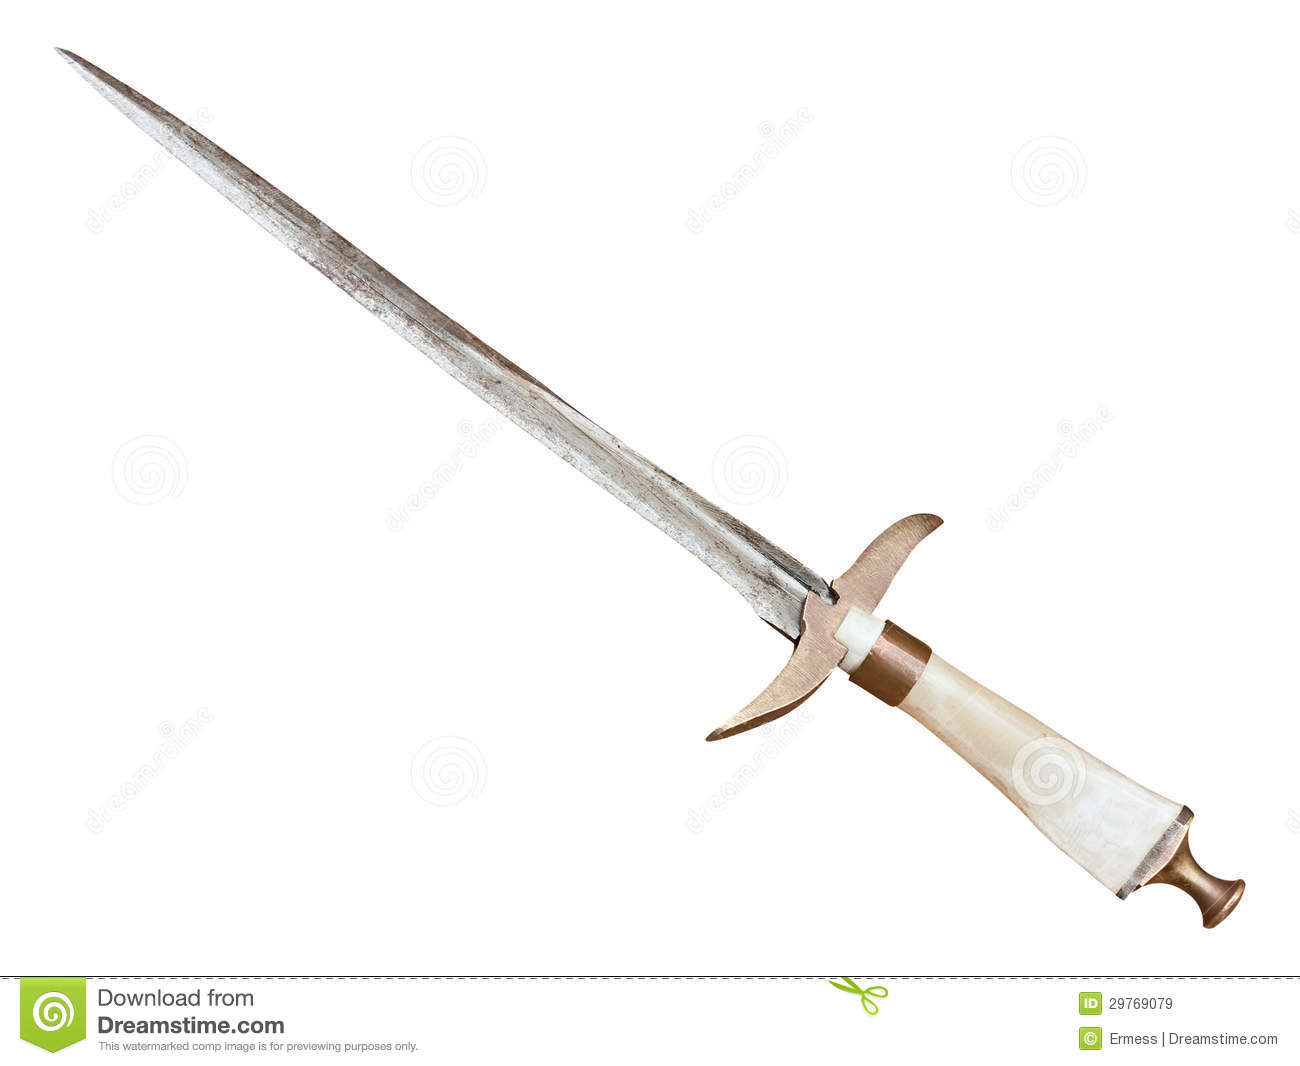 Medieval Dagger With A Long Slender Blade   Antique Hand Weapon With    